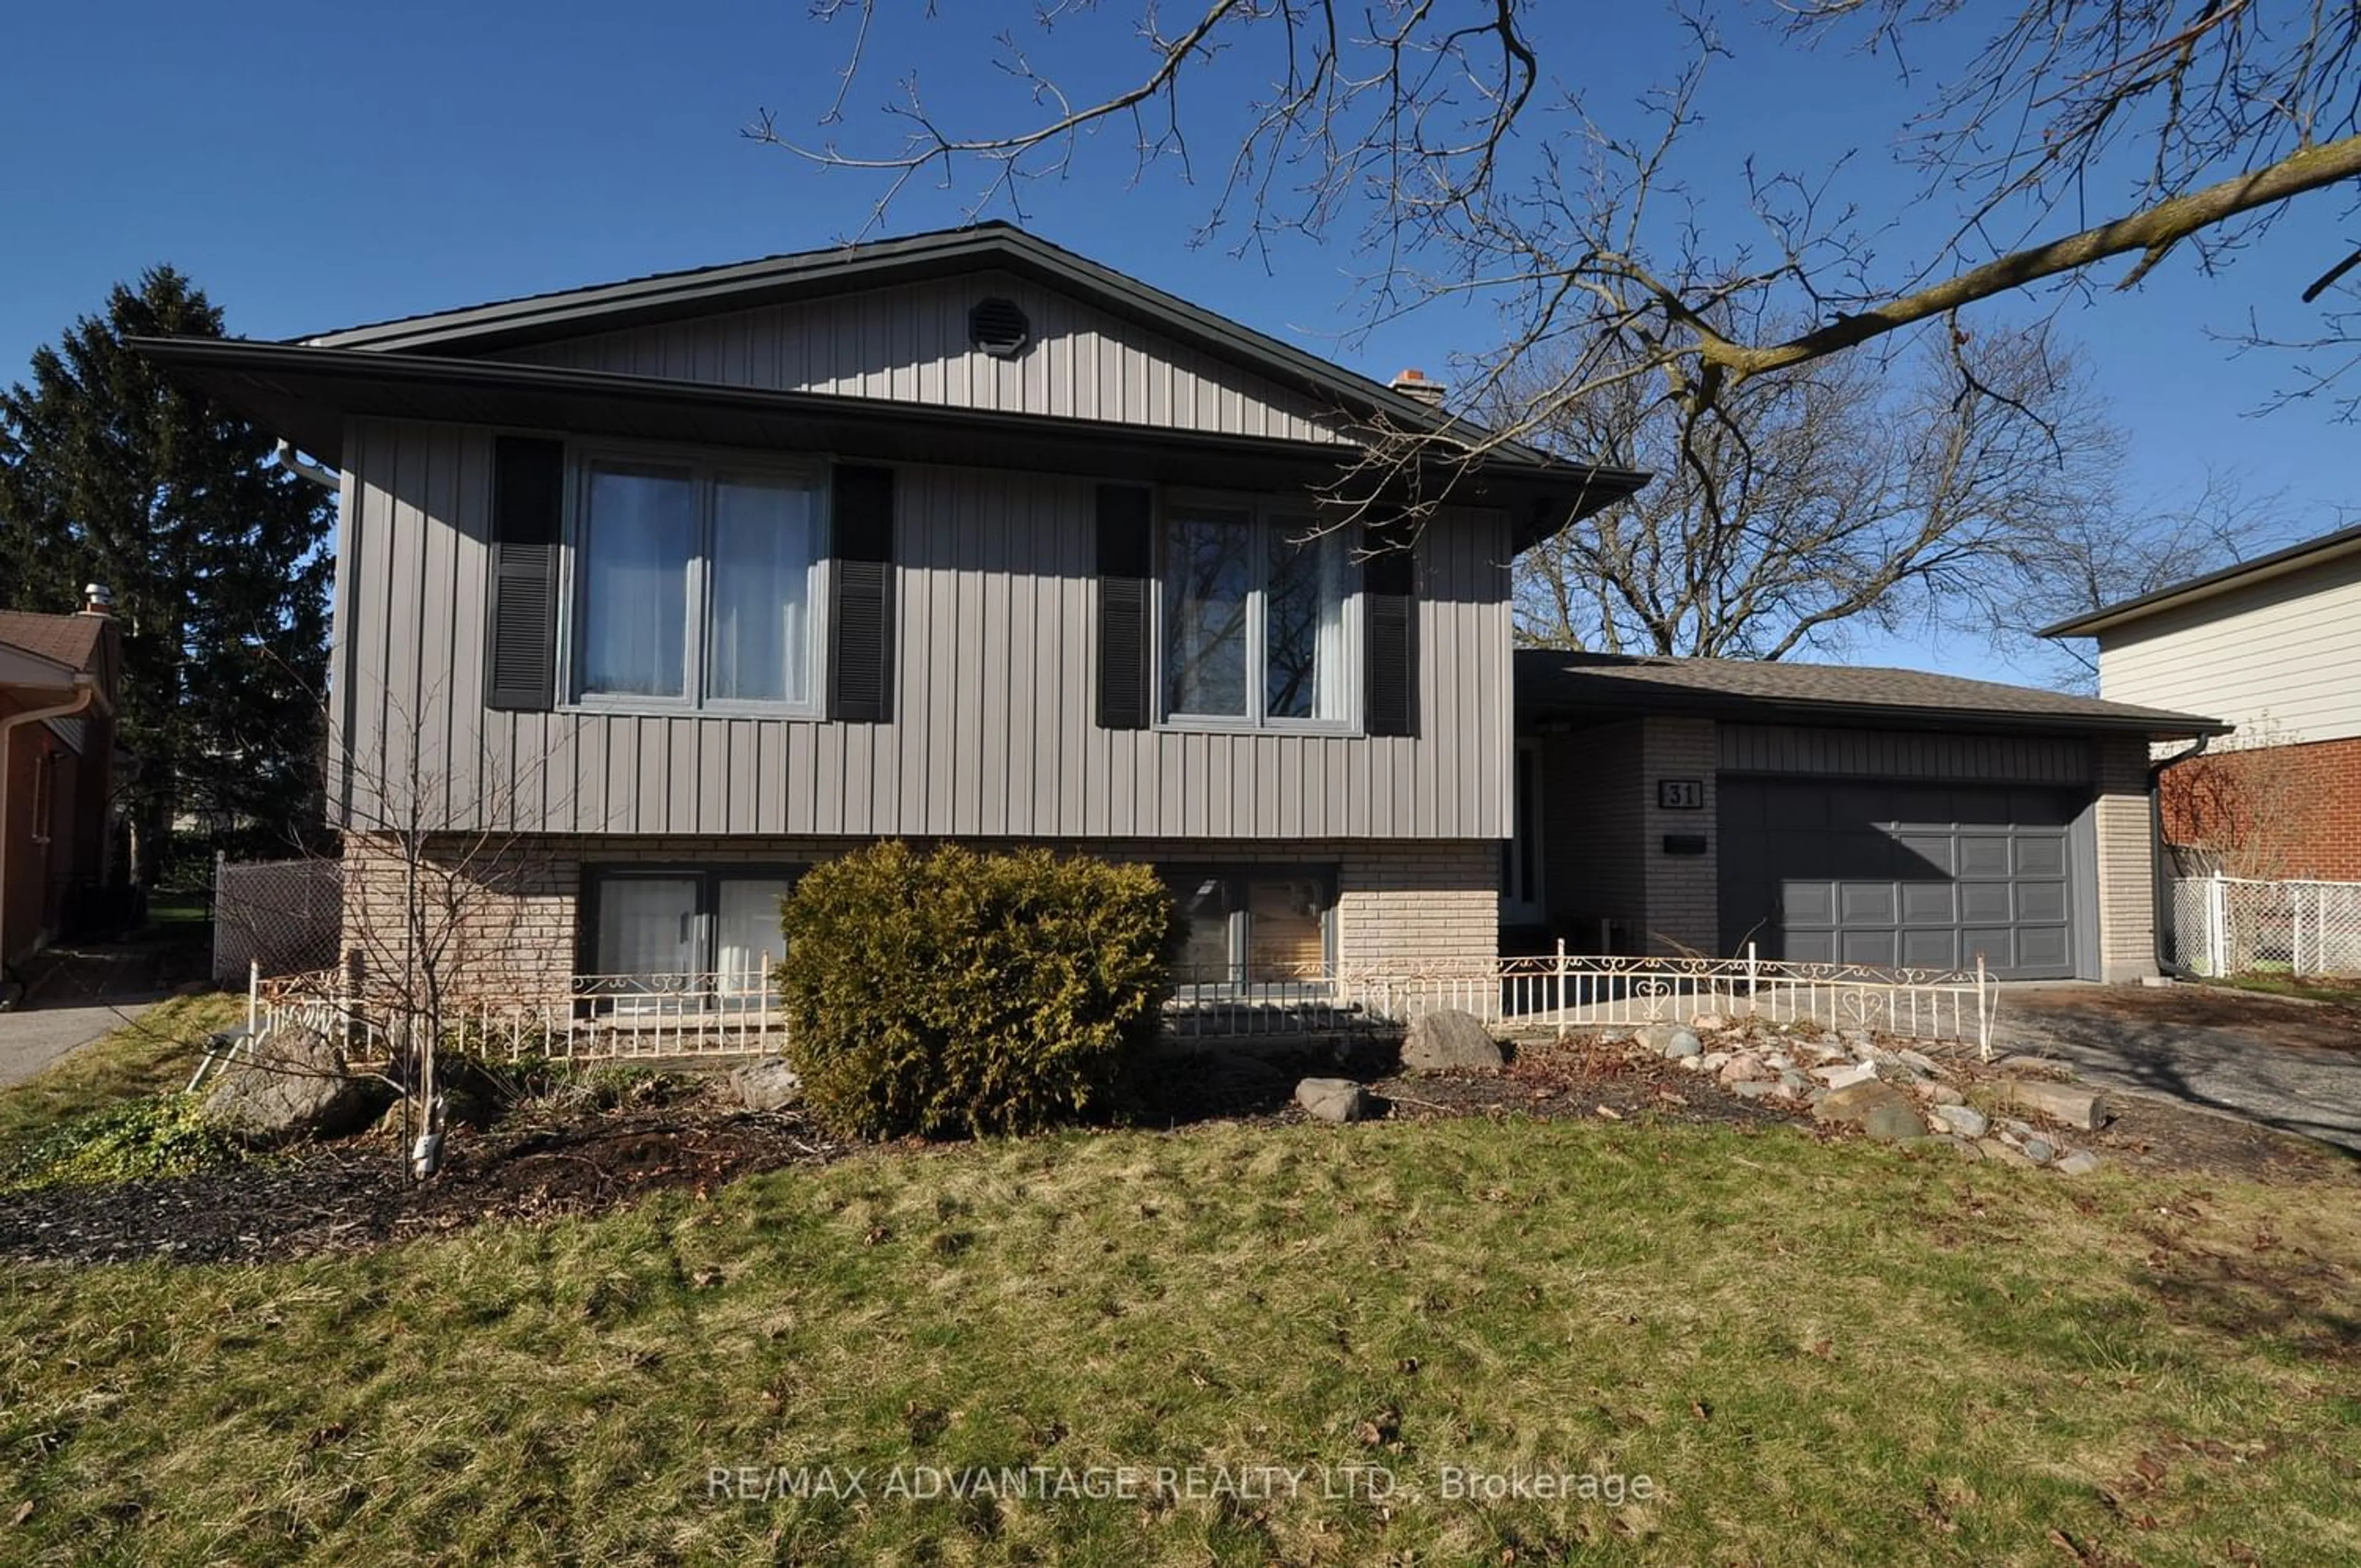 Home with vinyl exterior material for 31 Fox Mill Crt, London Ontario N6J 2B7